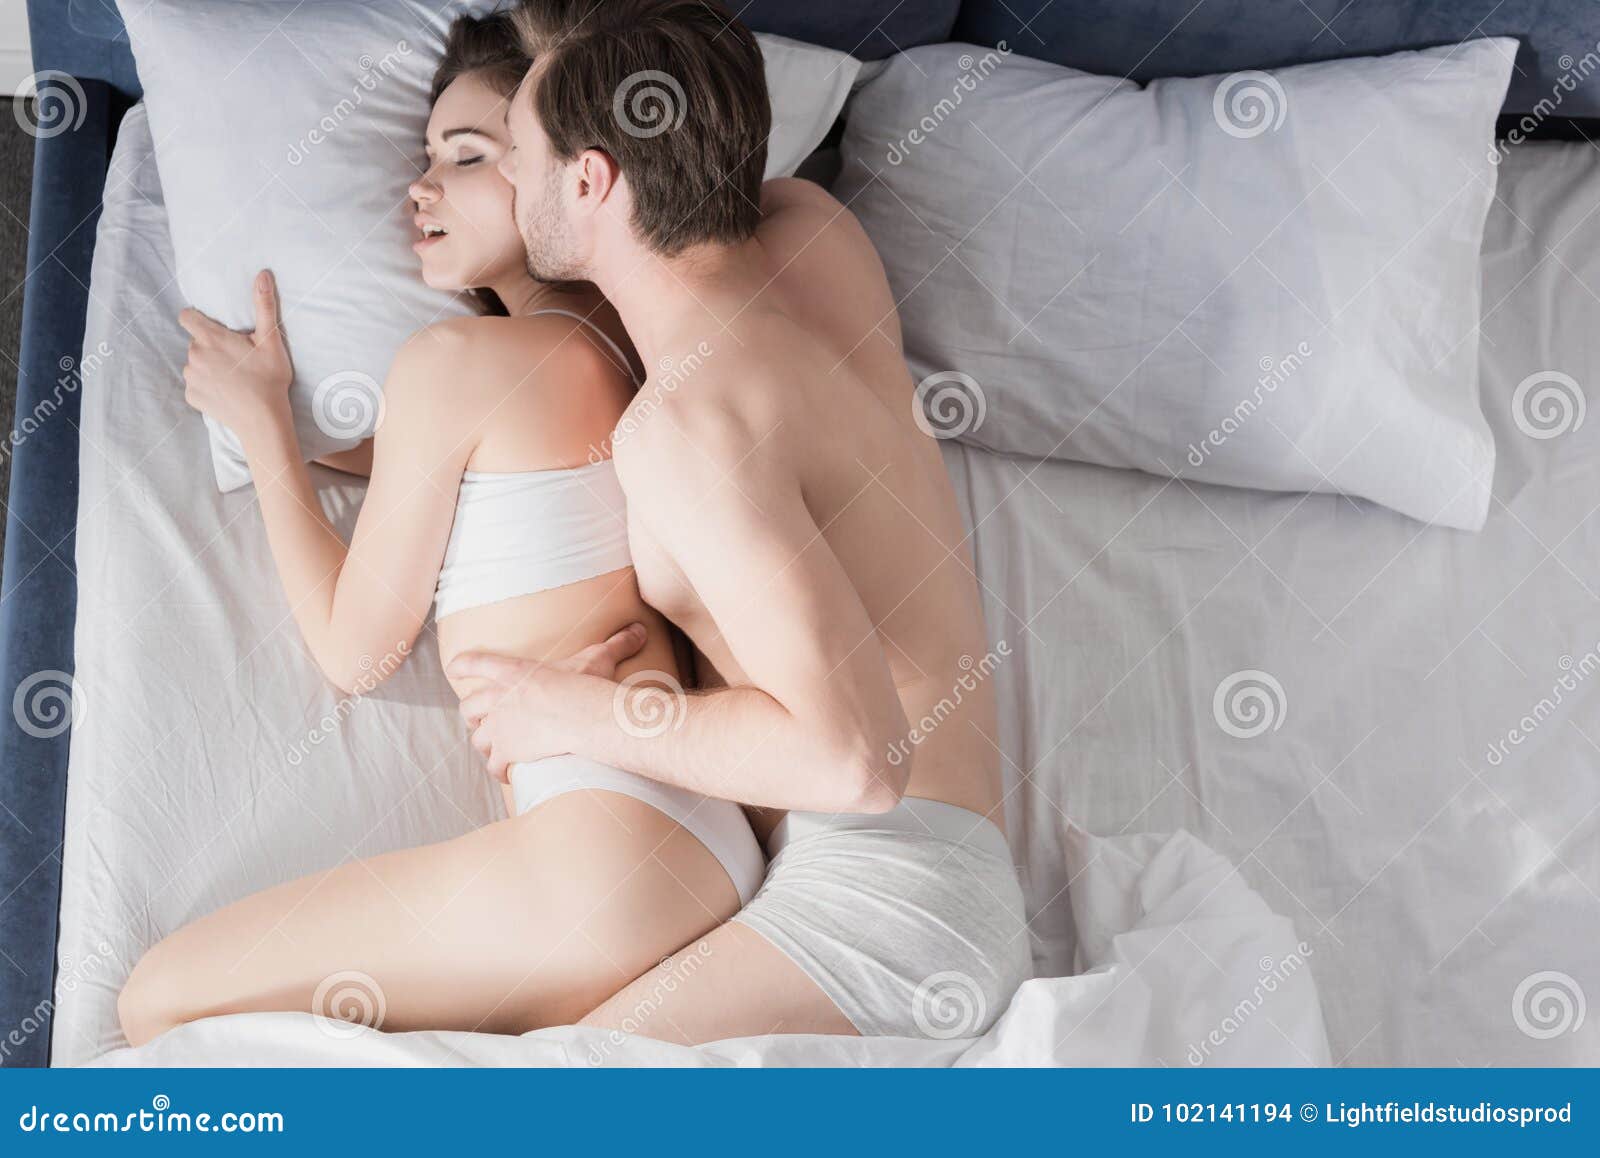 dichen sherpa recommends passionate couple in bed pic